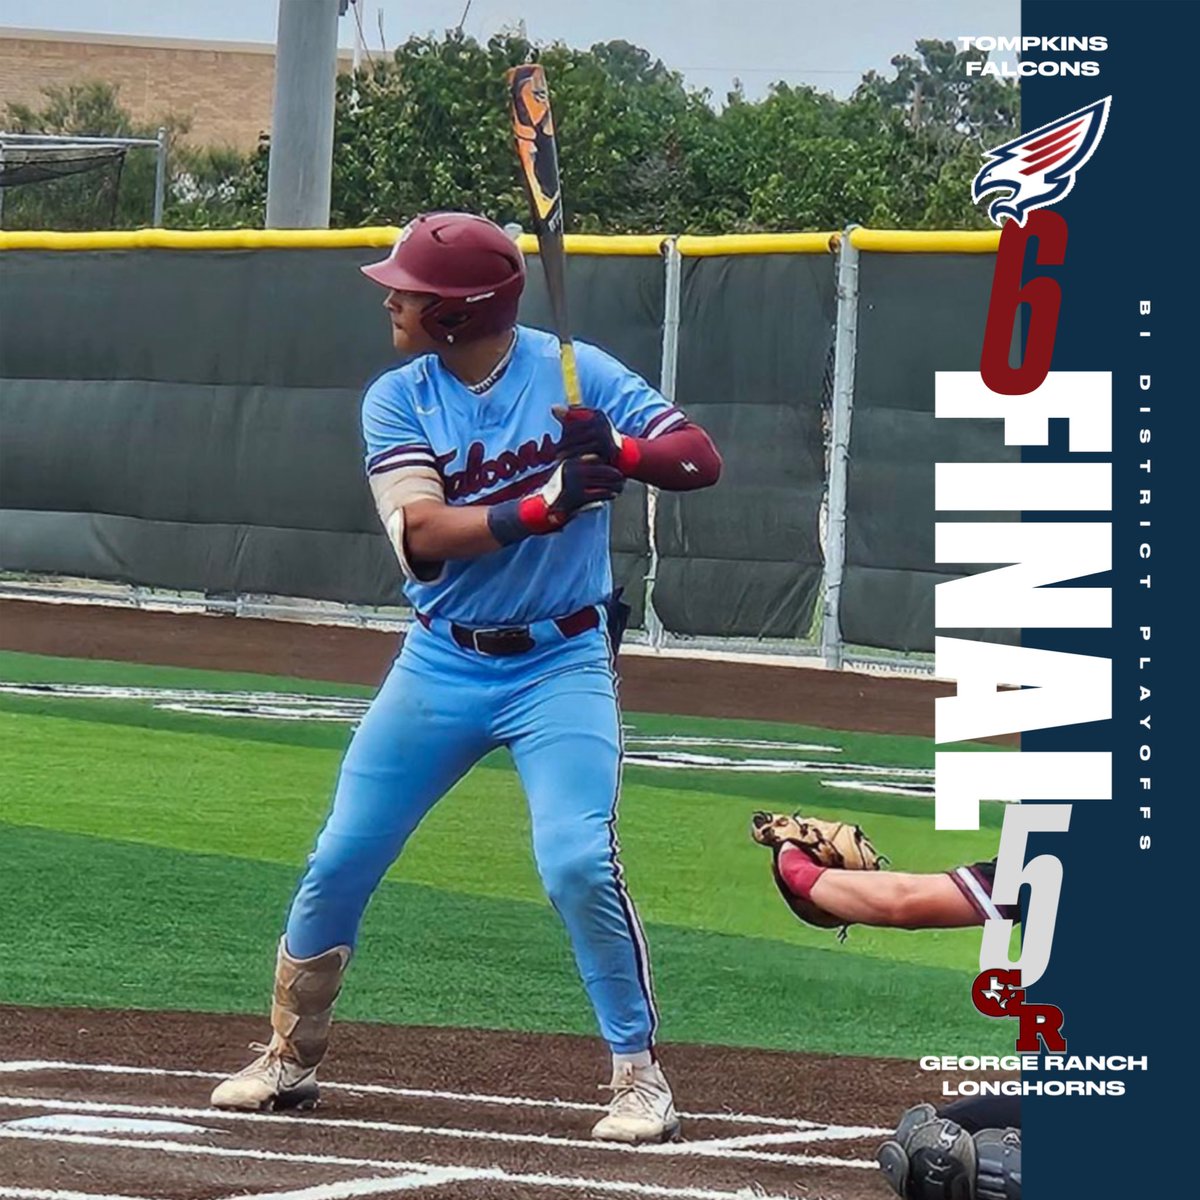 Falcons win!!! Tompkins battles and comes out on top over George Ranch 6-5 to advance to the Area round of the playoffs!